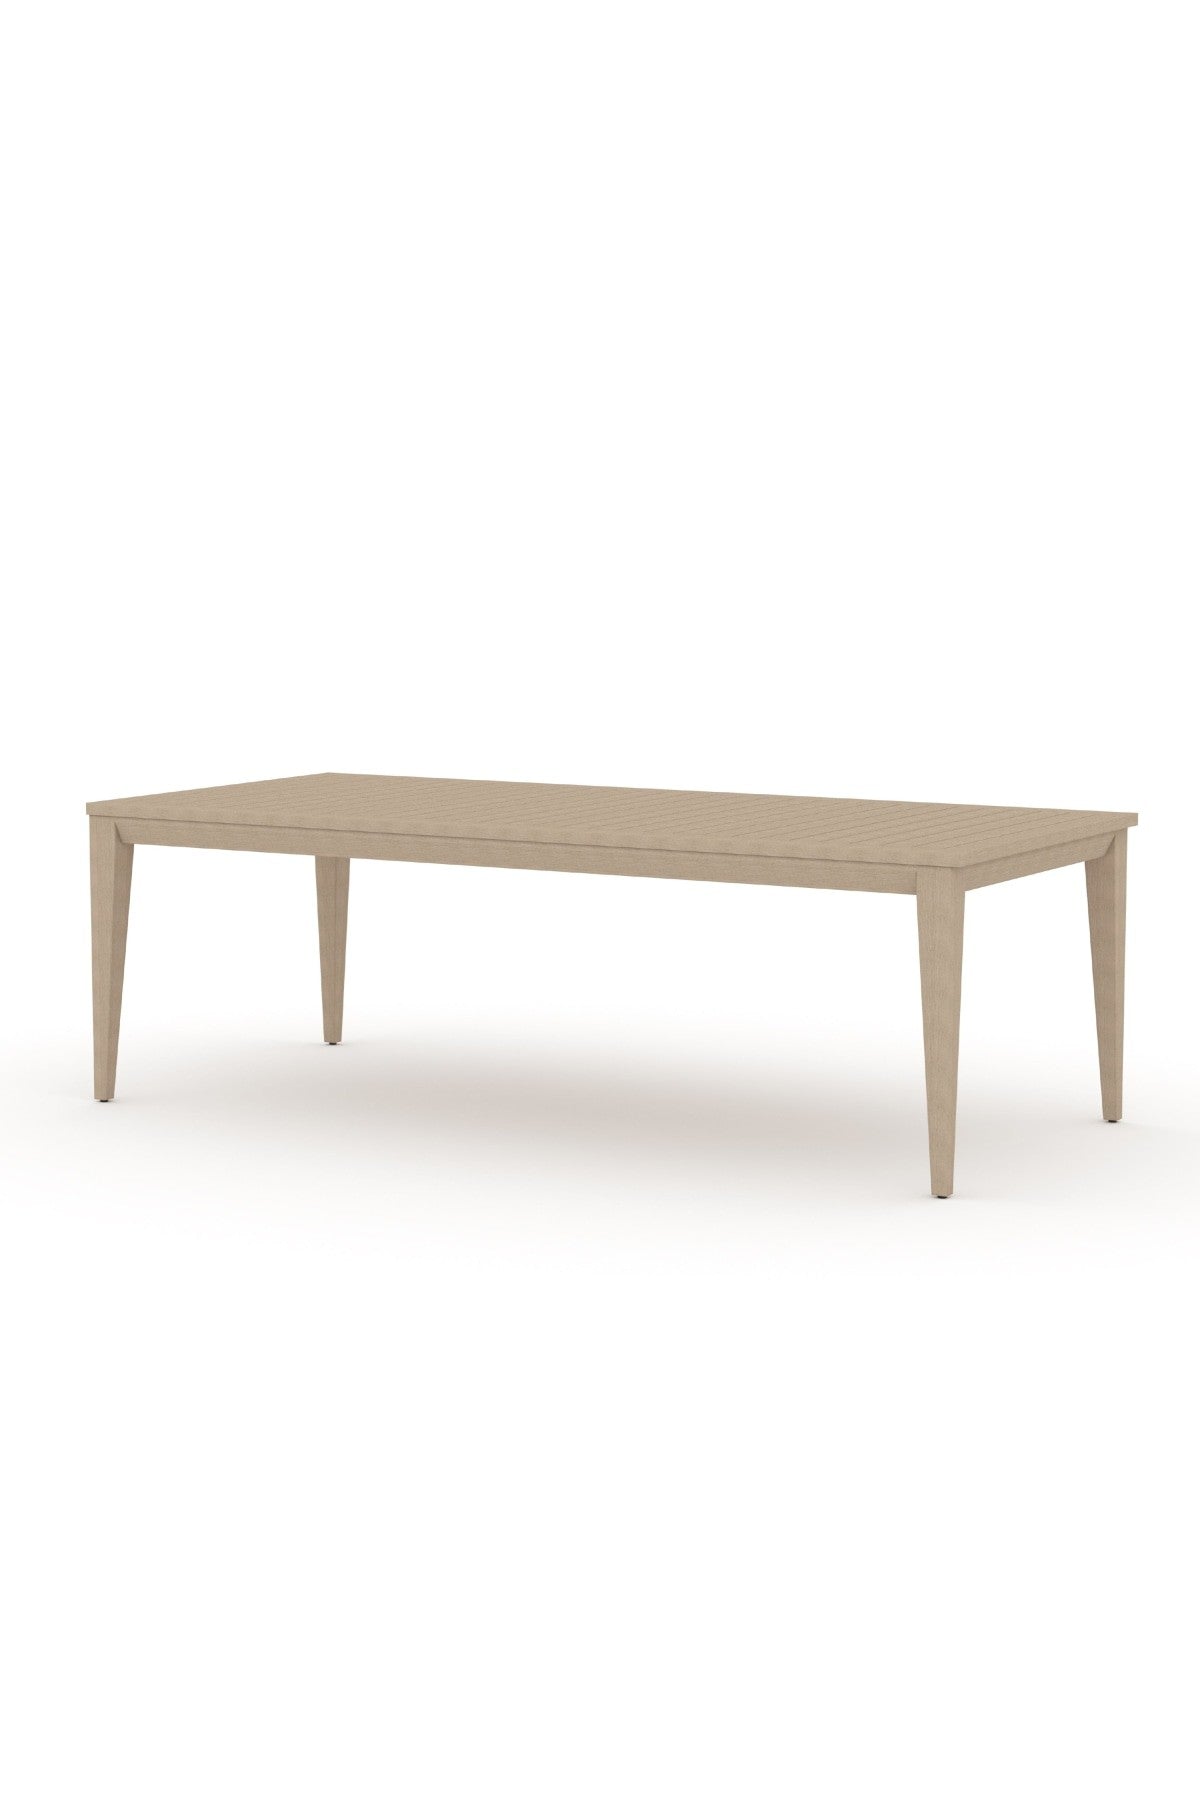 Manilo Outdoor Dining Table - Washed Brown